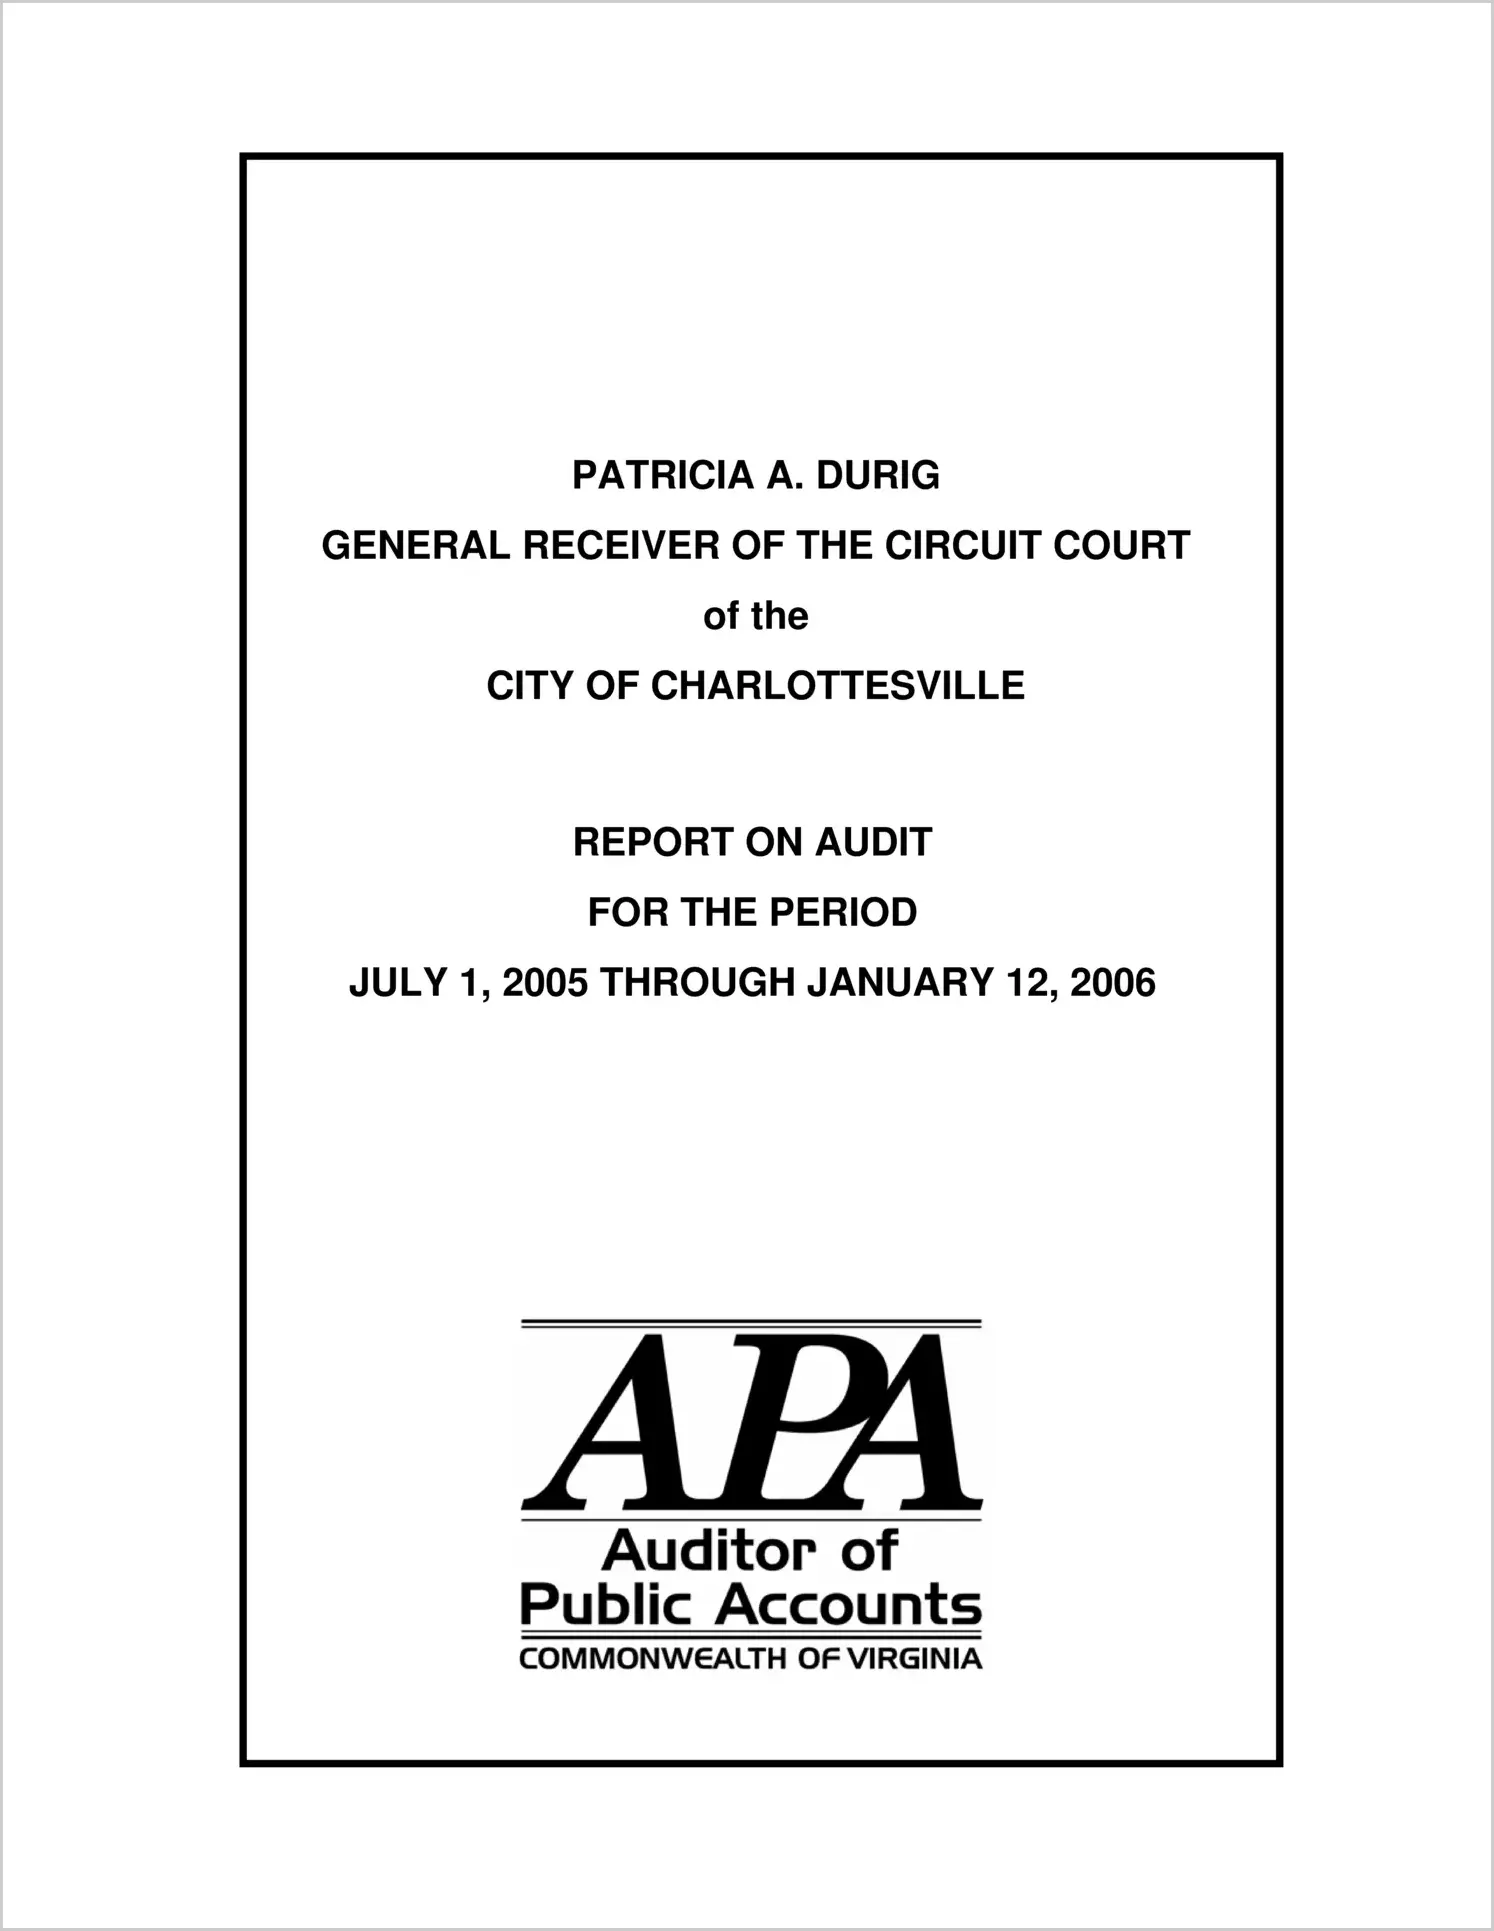 General Receiver of the Circuit Court of the City of Charlottesville Turnover for the period July 1, 2005 through January 12, 2006